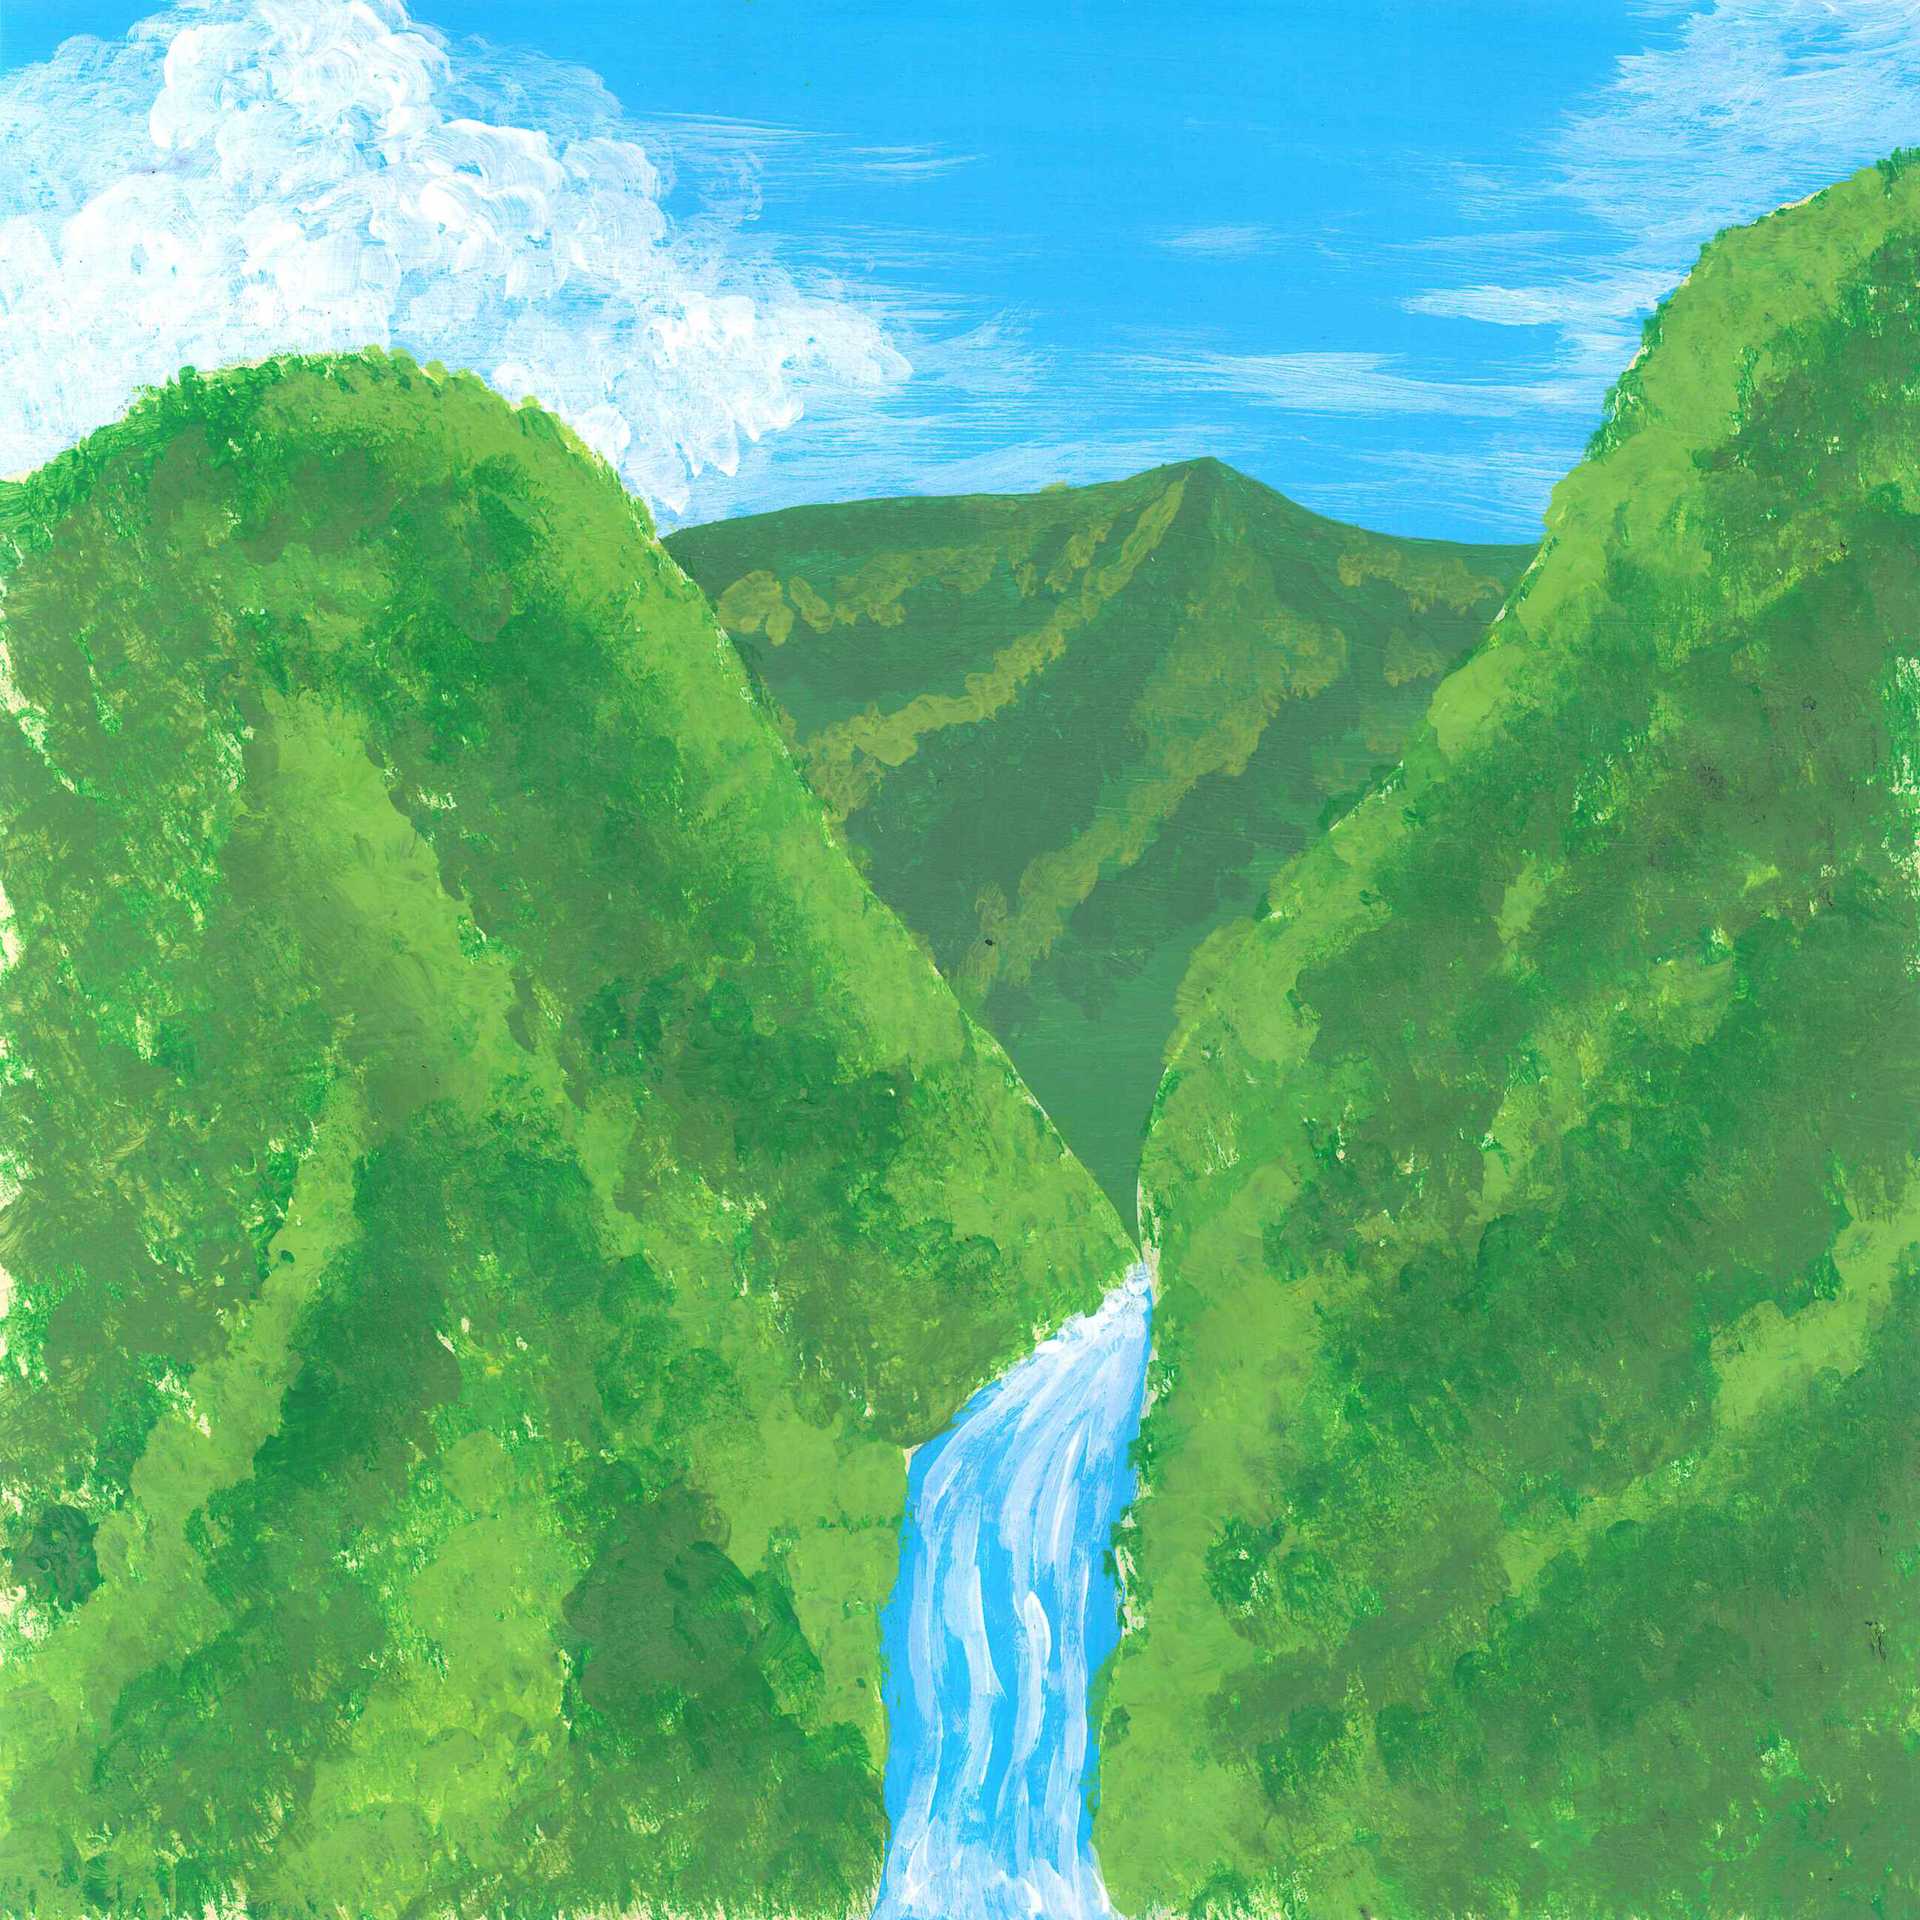 Gariwang Mountain Mossy Valley - nature landscape painting - earth.fm